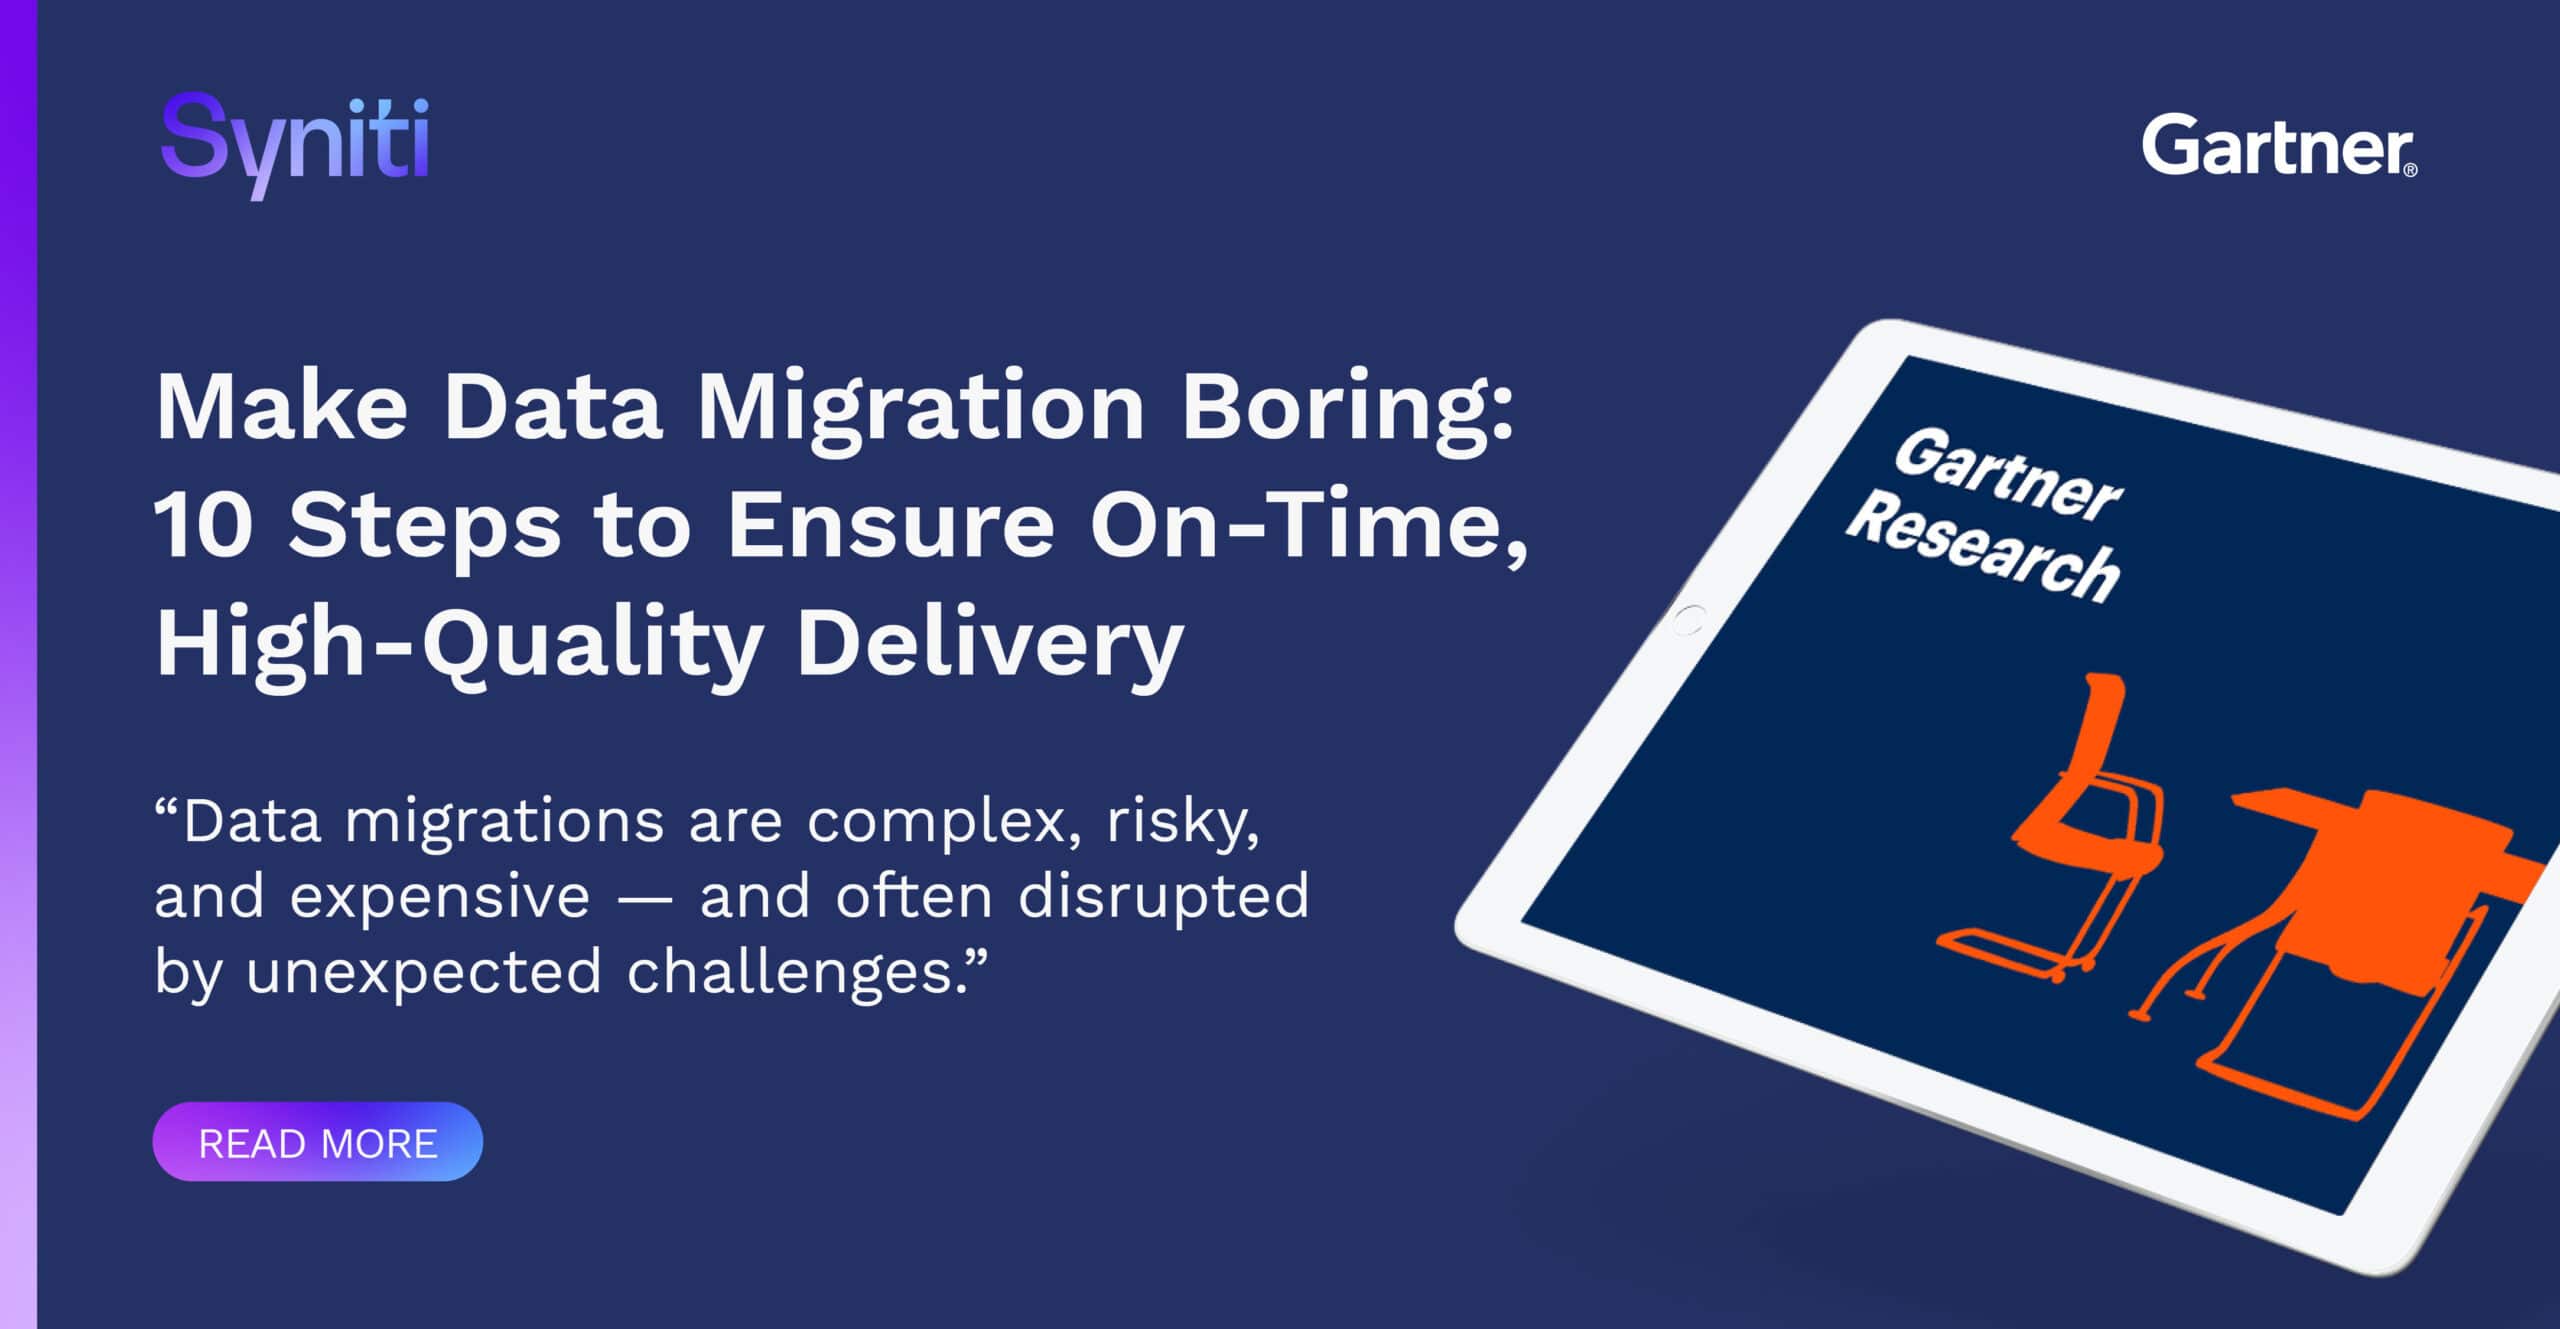 Gartner Research — Make Data Migration Boring: 10 Steps to Ensure On-Time, High-Quality Delivery